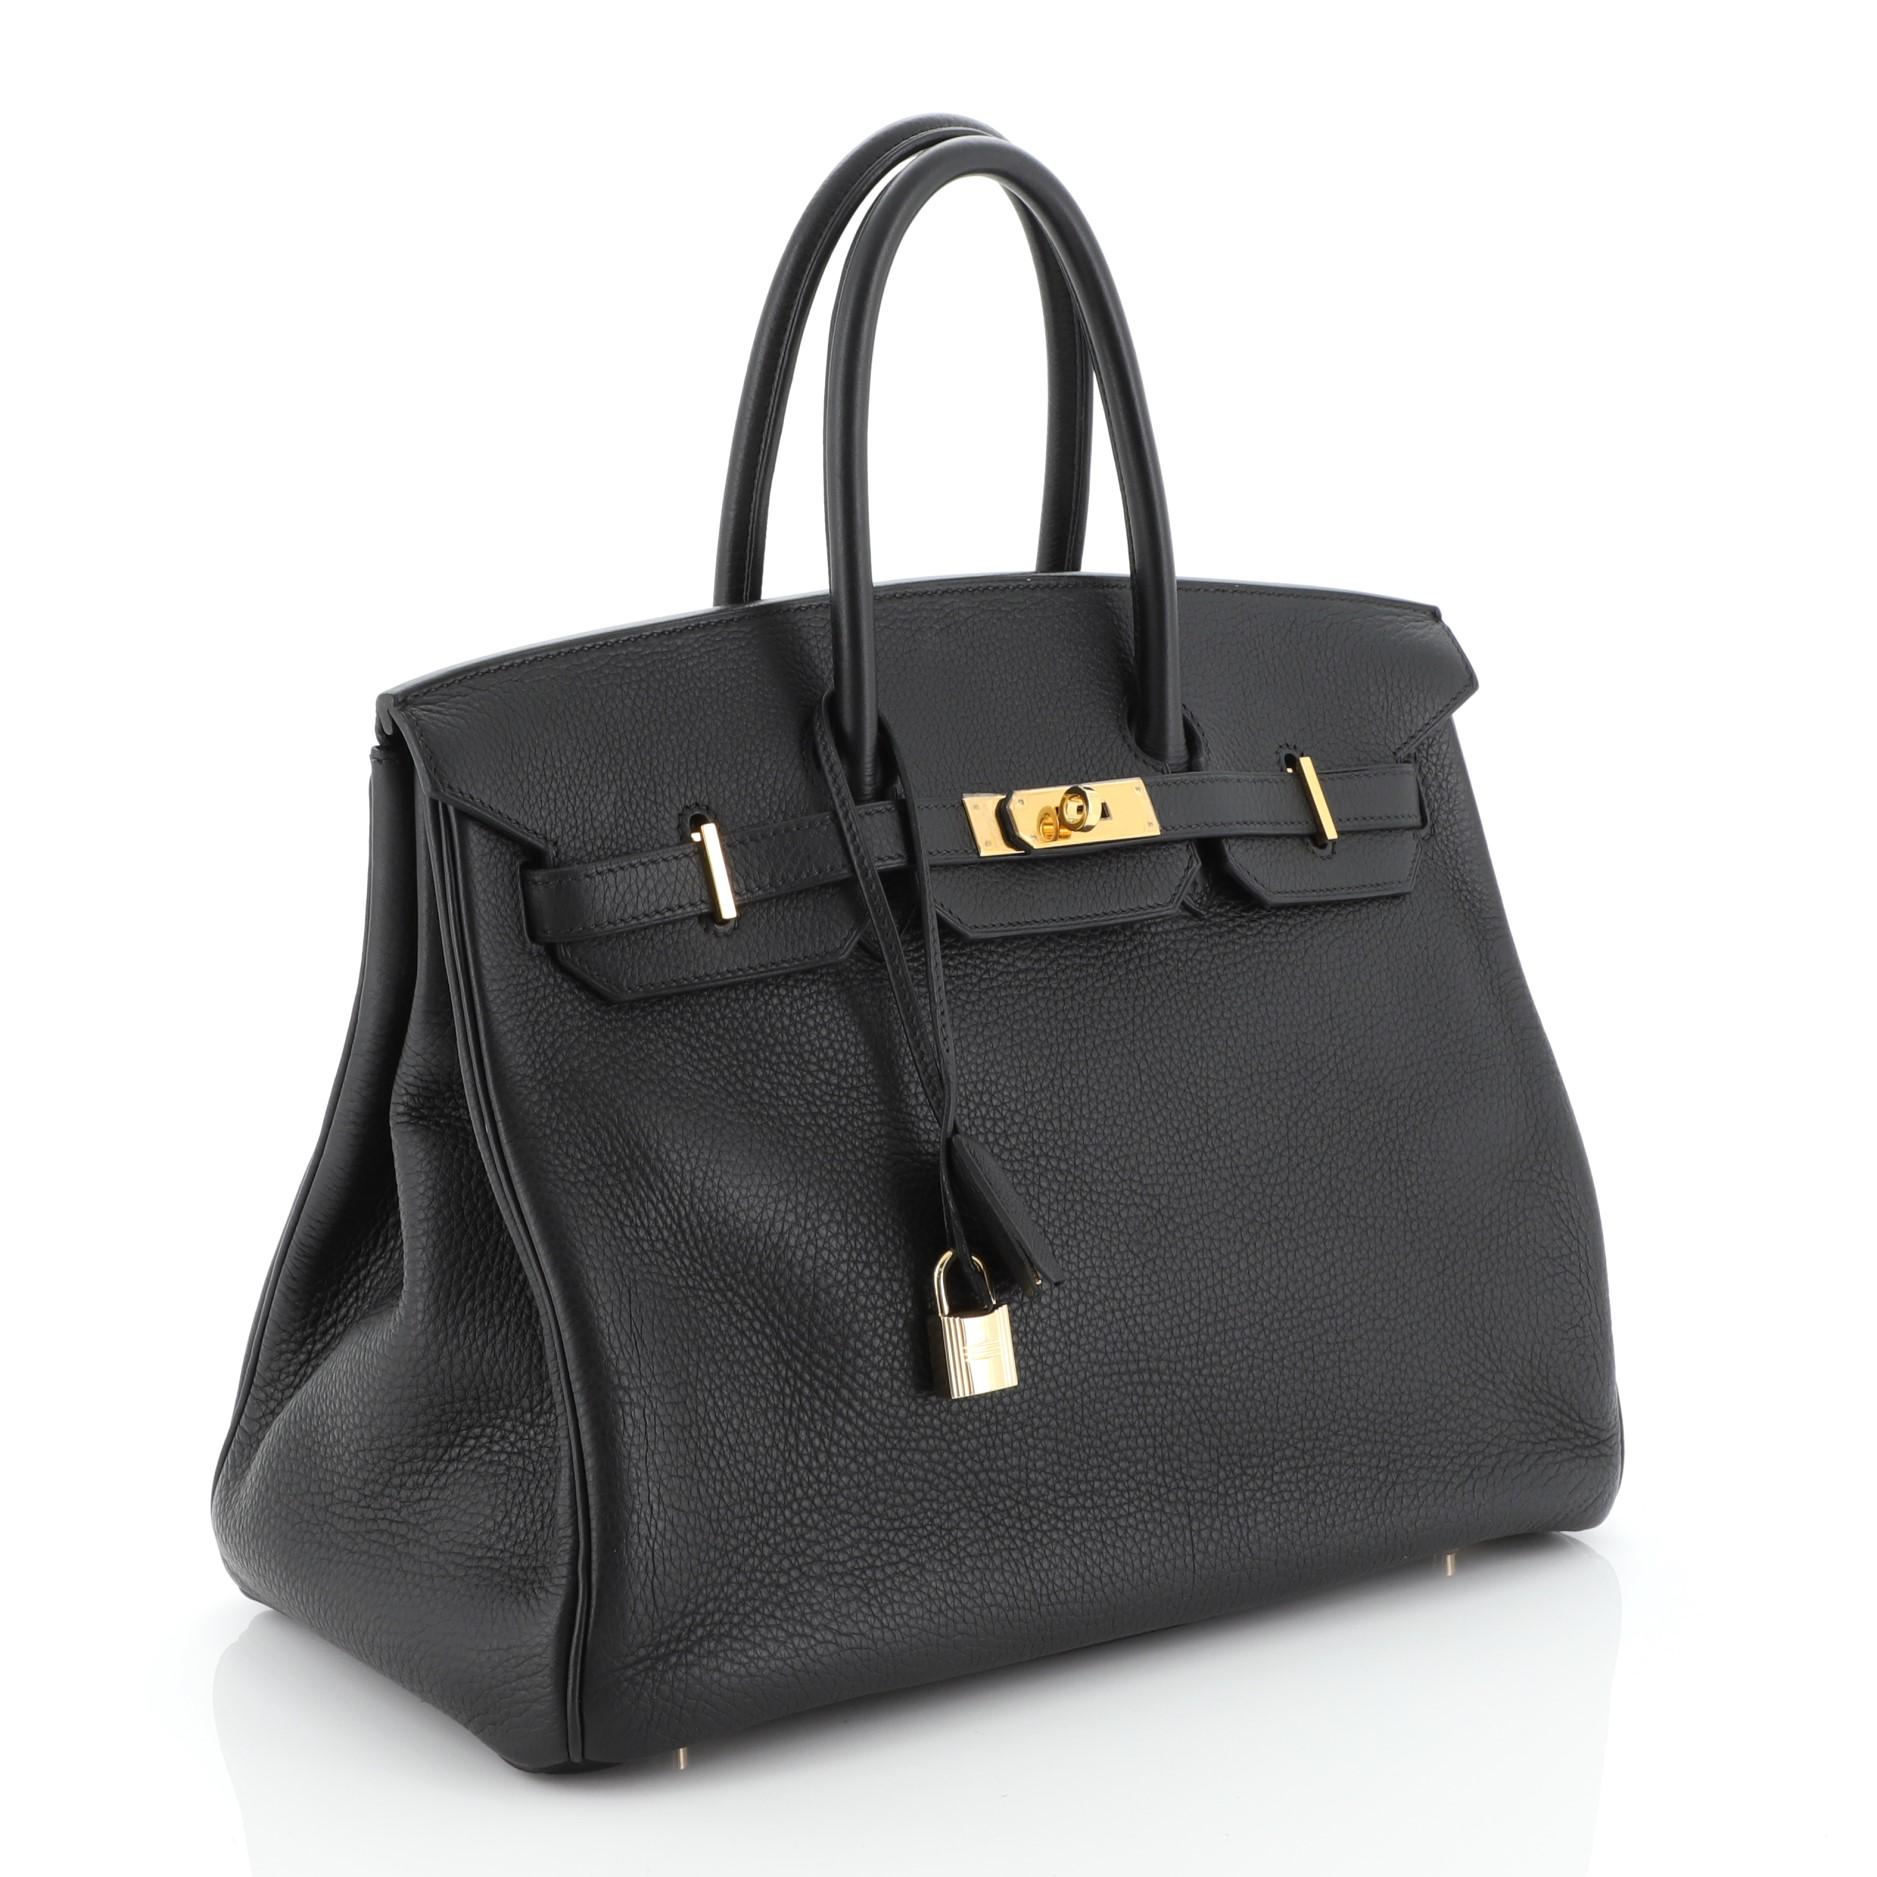 This Hermes Birkin Handbag Noir Togo with Gold Hardware 35, crafted in Noir black Togo leather, features dual rolled handles, frontal flap, and gold hardware. Its turn-lock closure opens to a Noir black Chevre leather interior with zip and slip